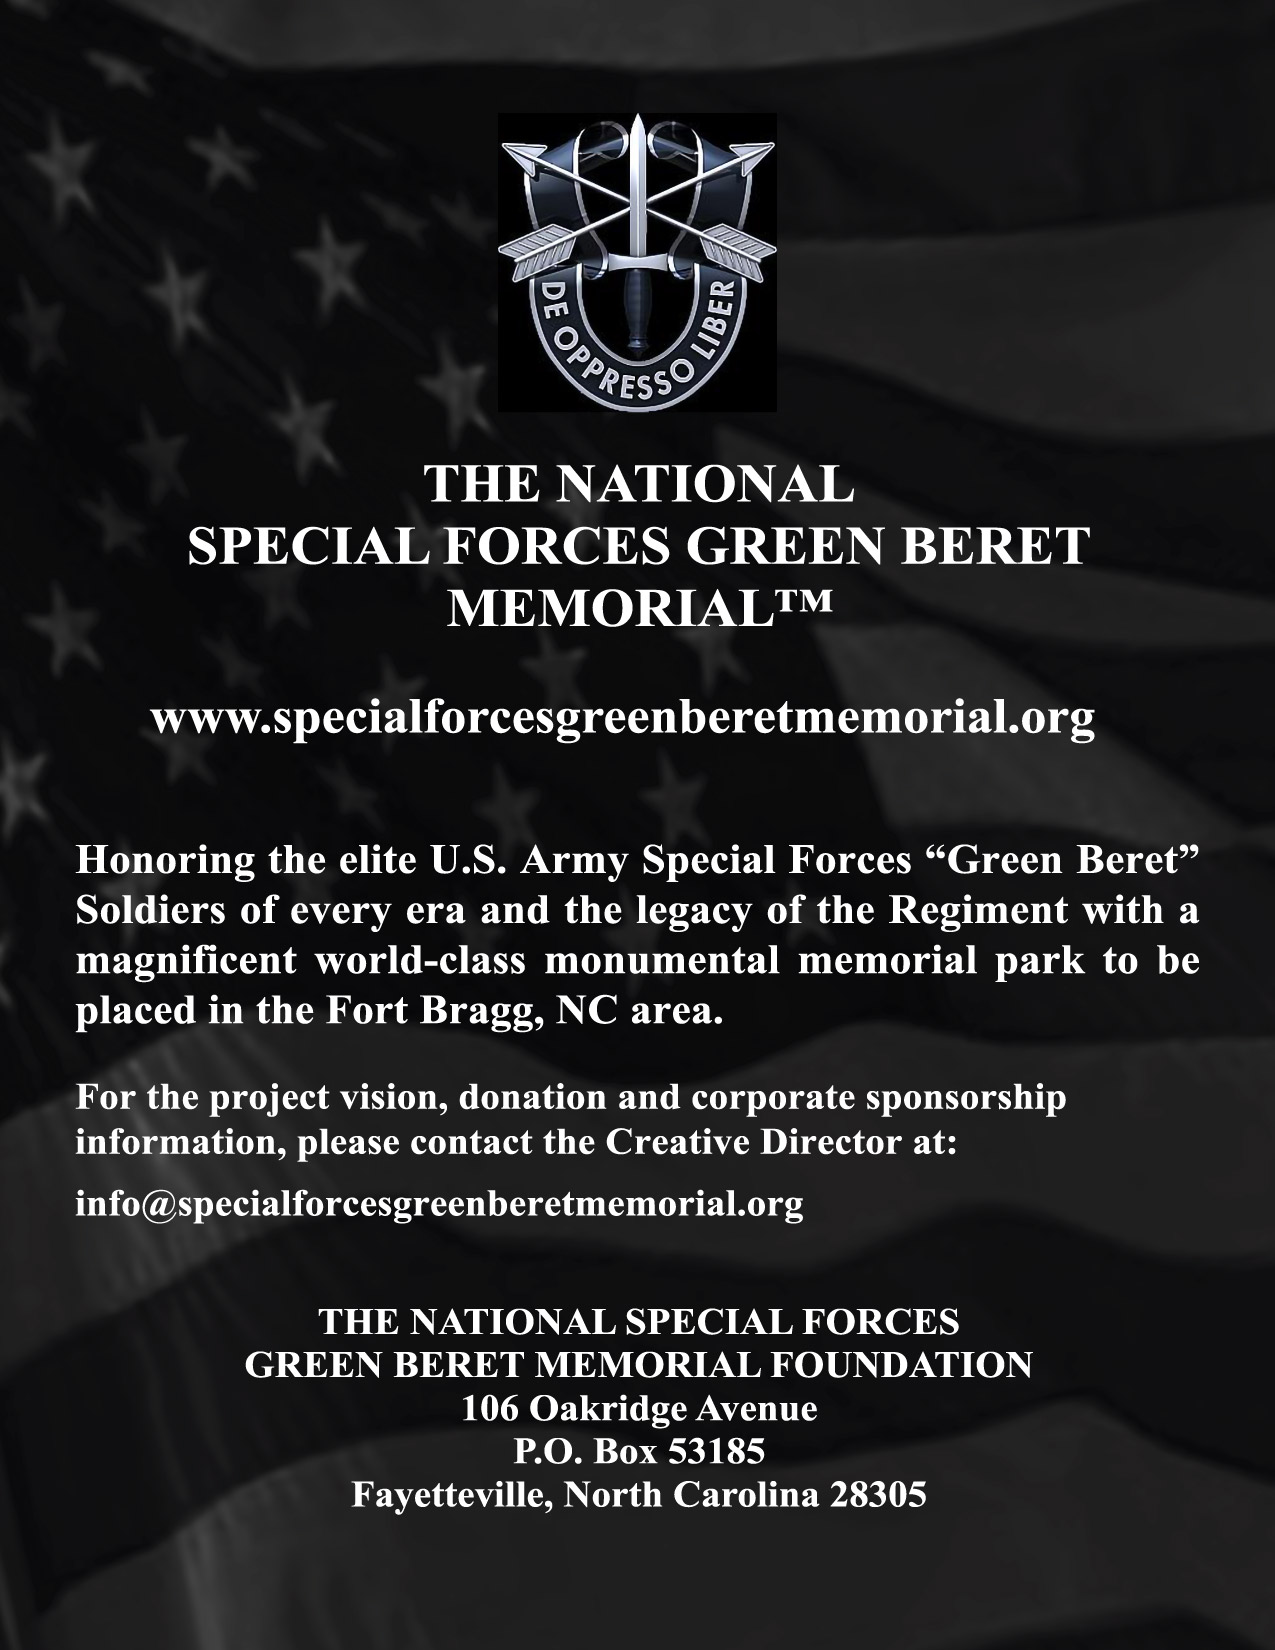 The National Special Forces Green Beret Memorial — Visit www.specialforcesgreenberetmemorial.org